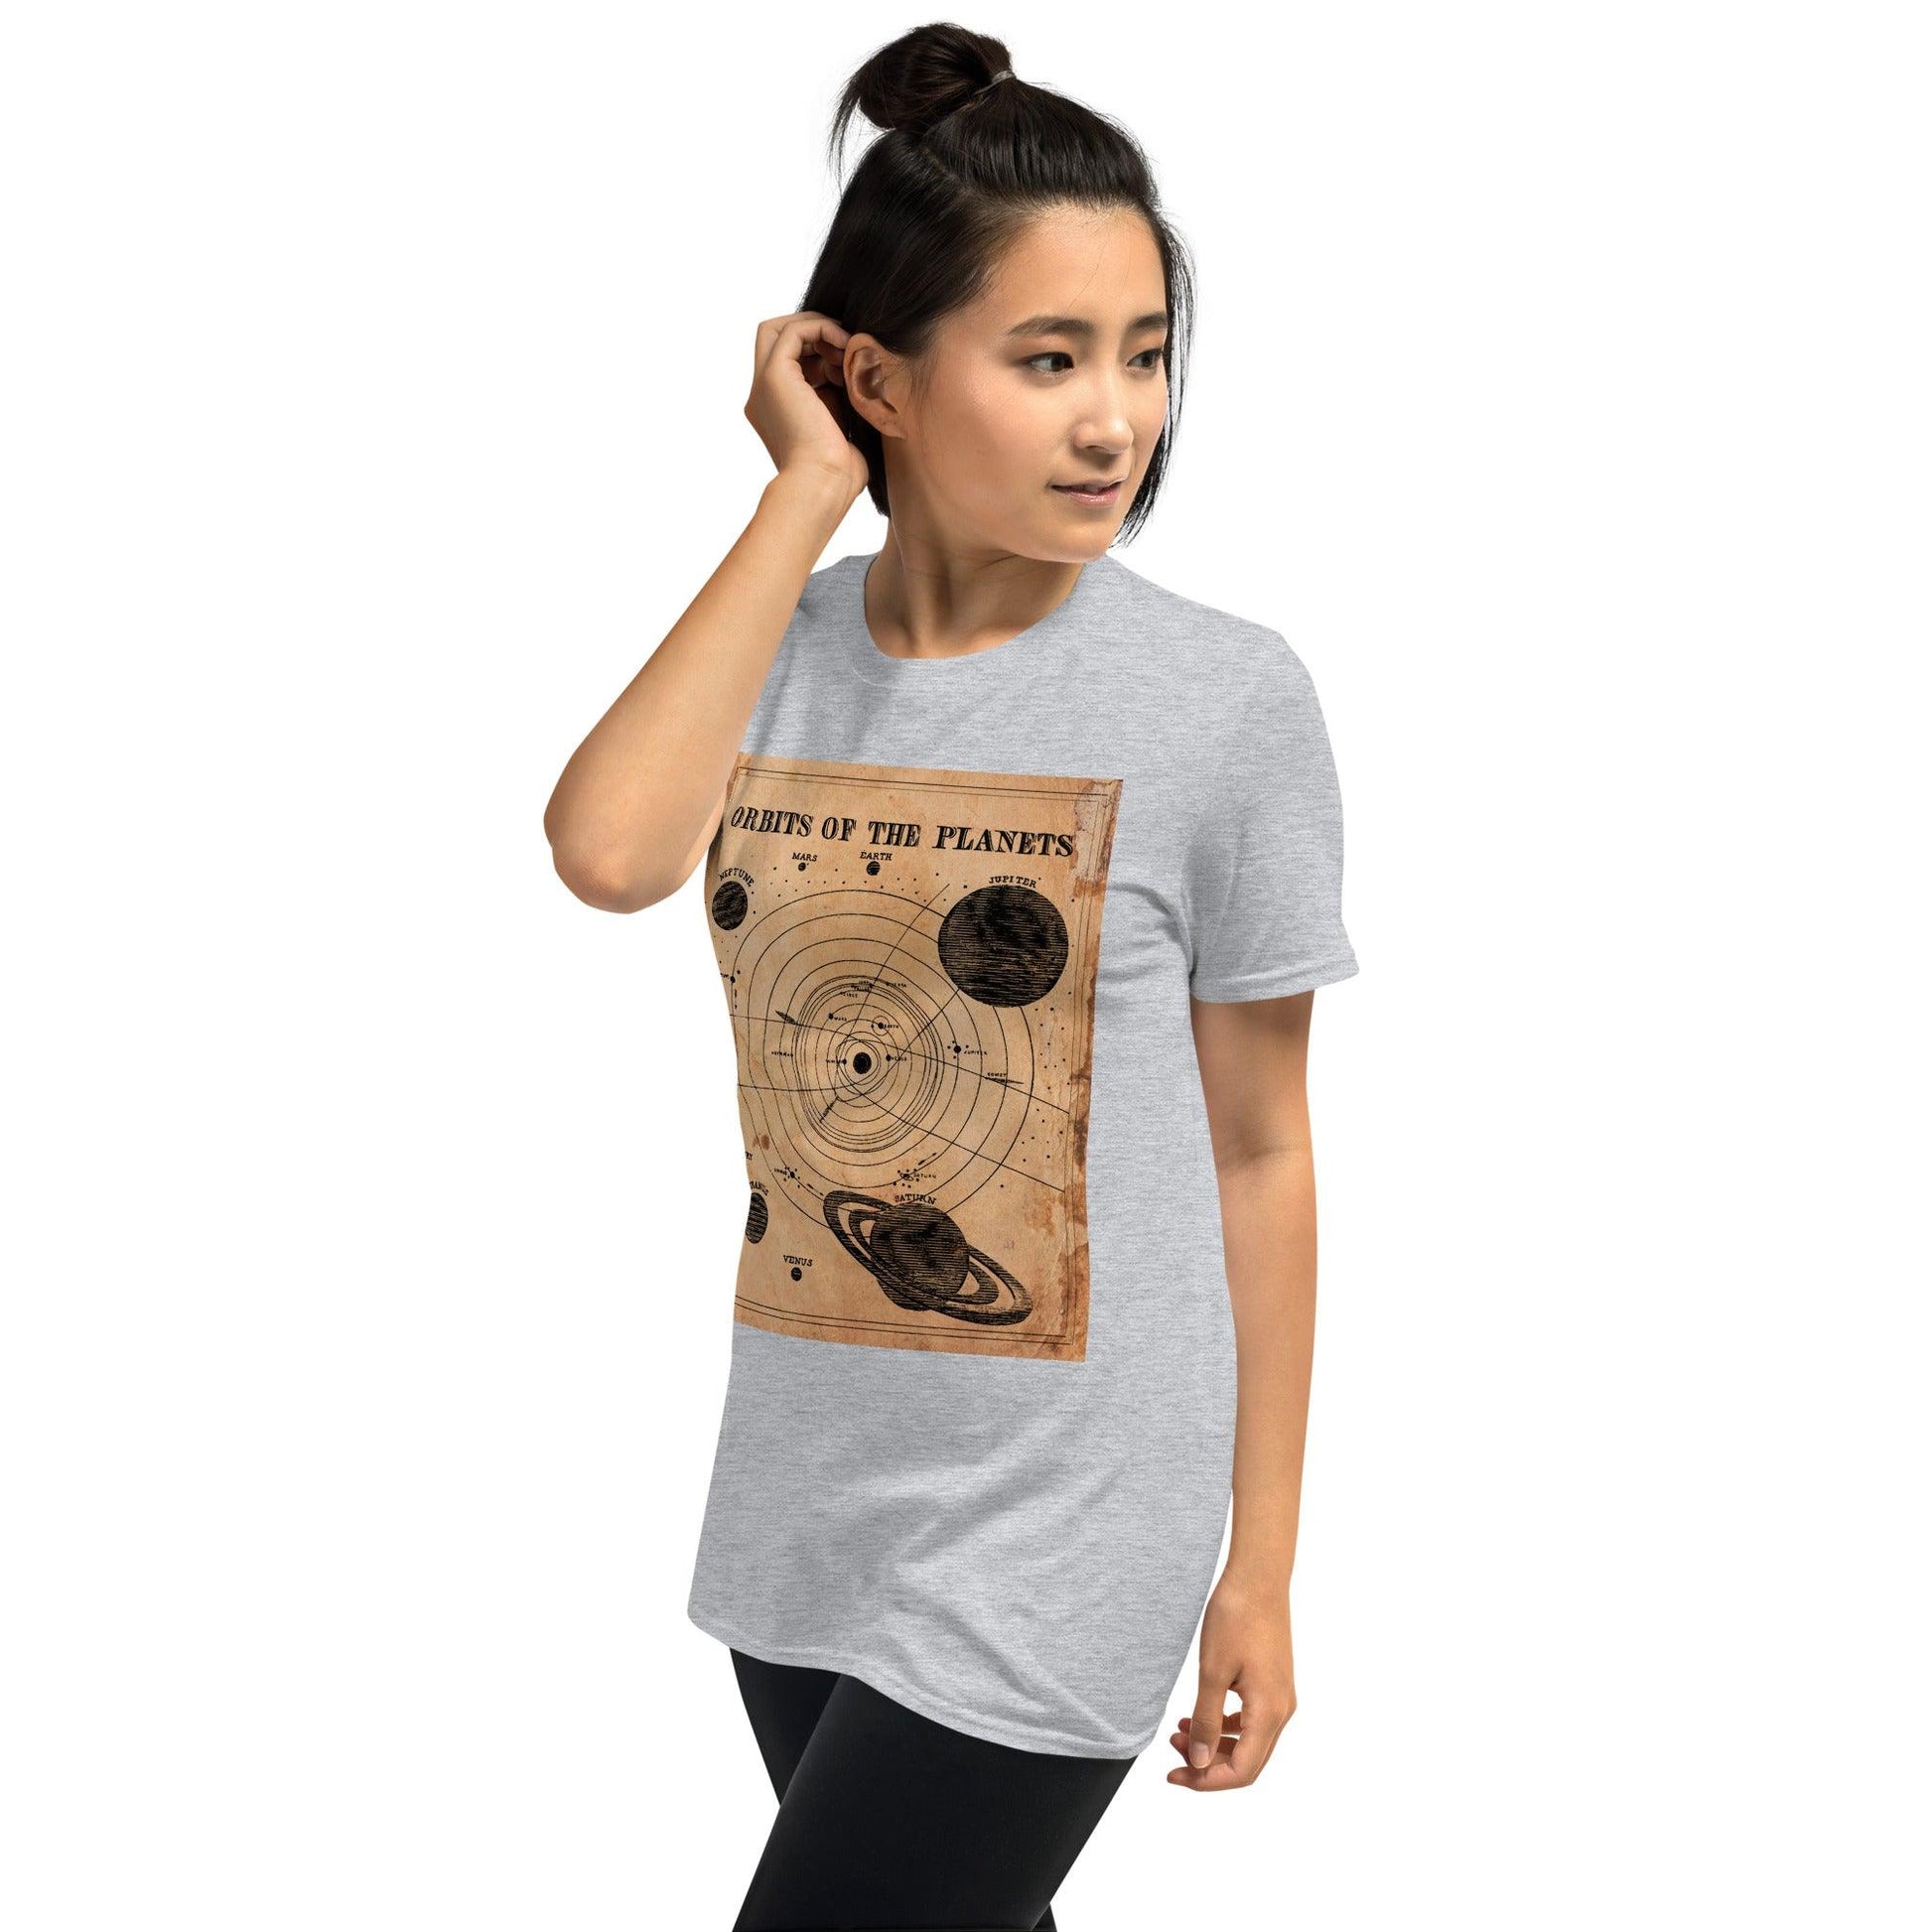 Orbits Of The Planets - Astro TShirts